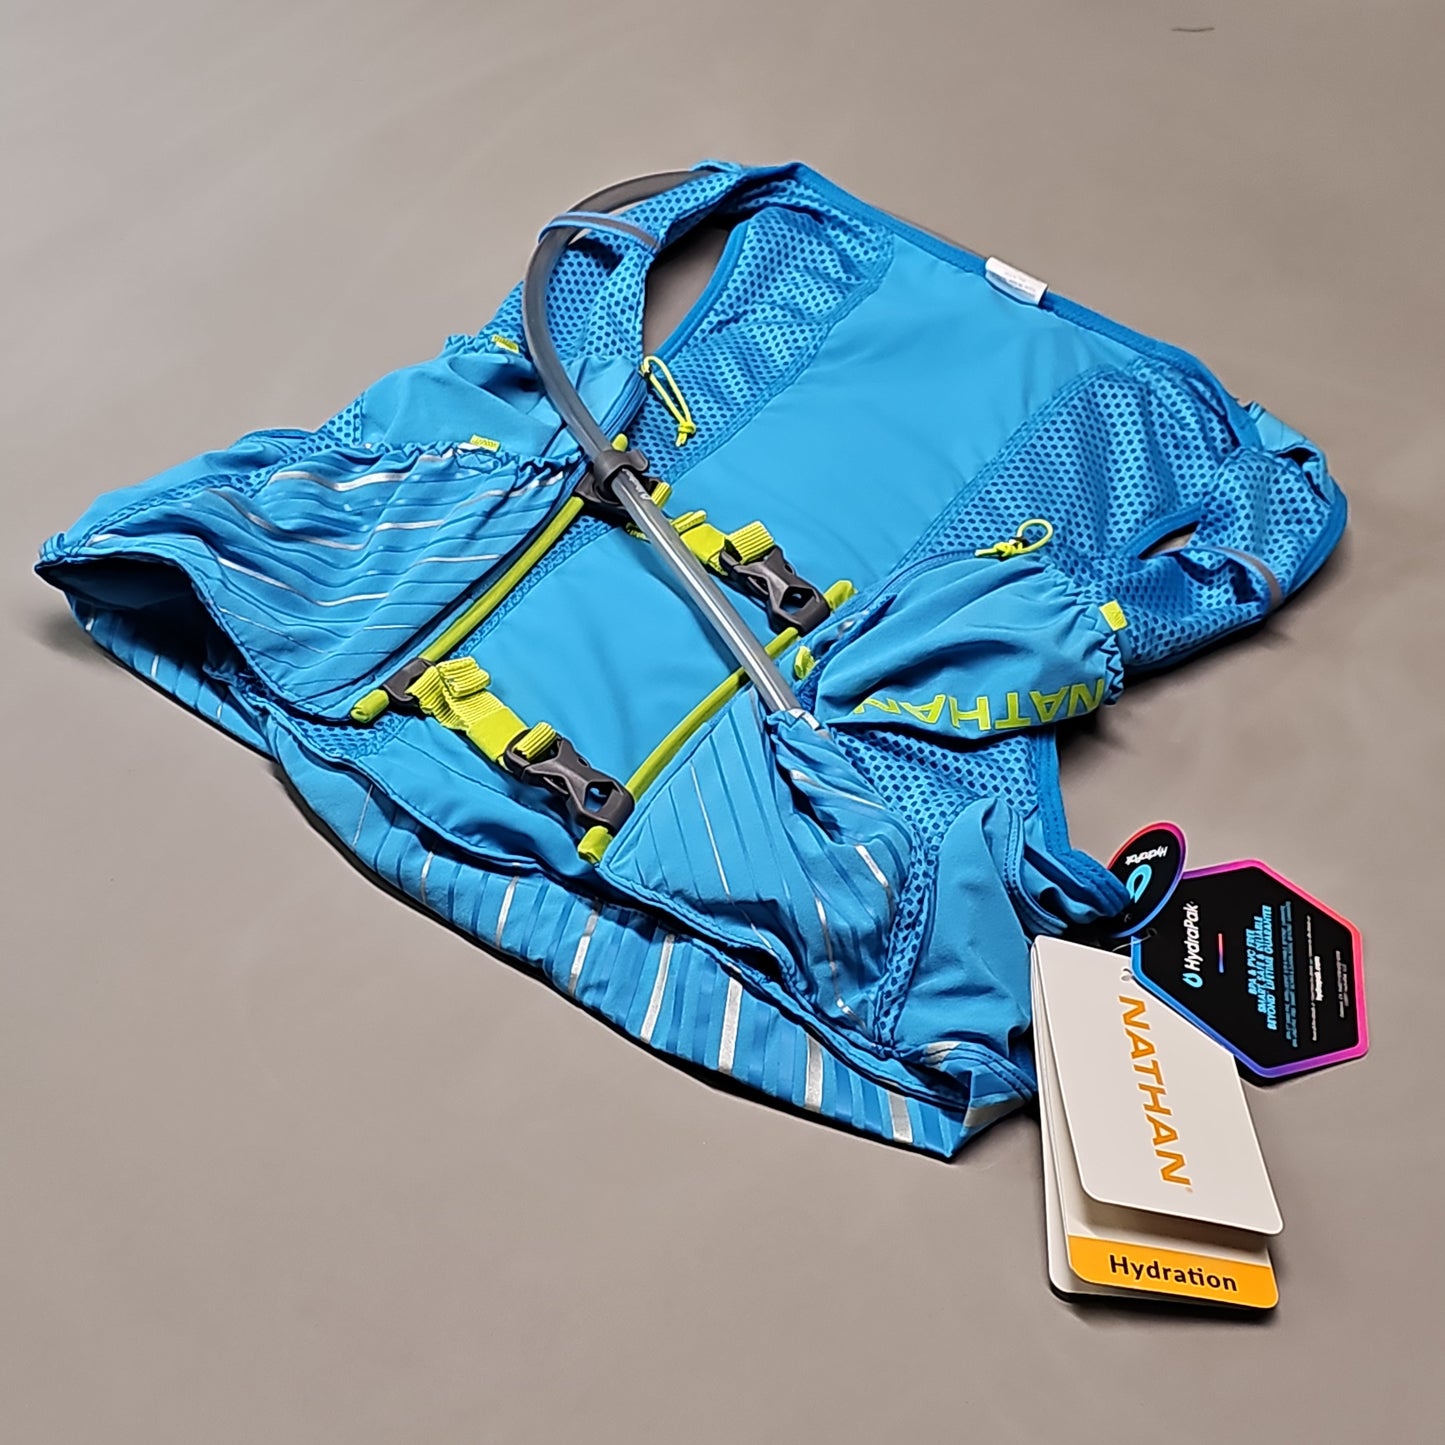 NATHAN Pinnacle 12 Liter Hydration Race Vest Unisex Sz S Blue Me Away/Finish Lime (New)